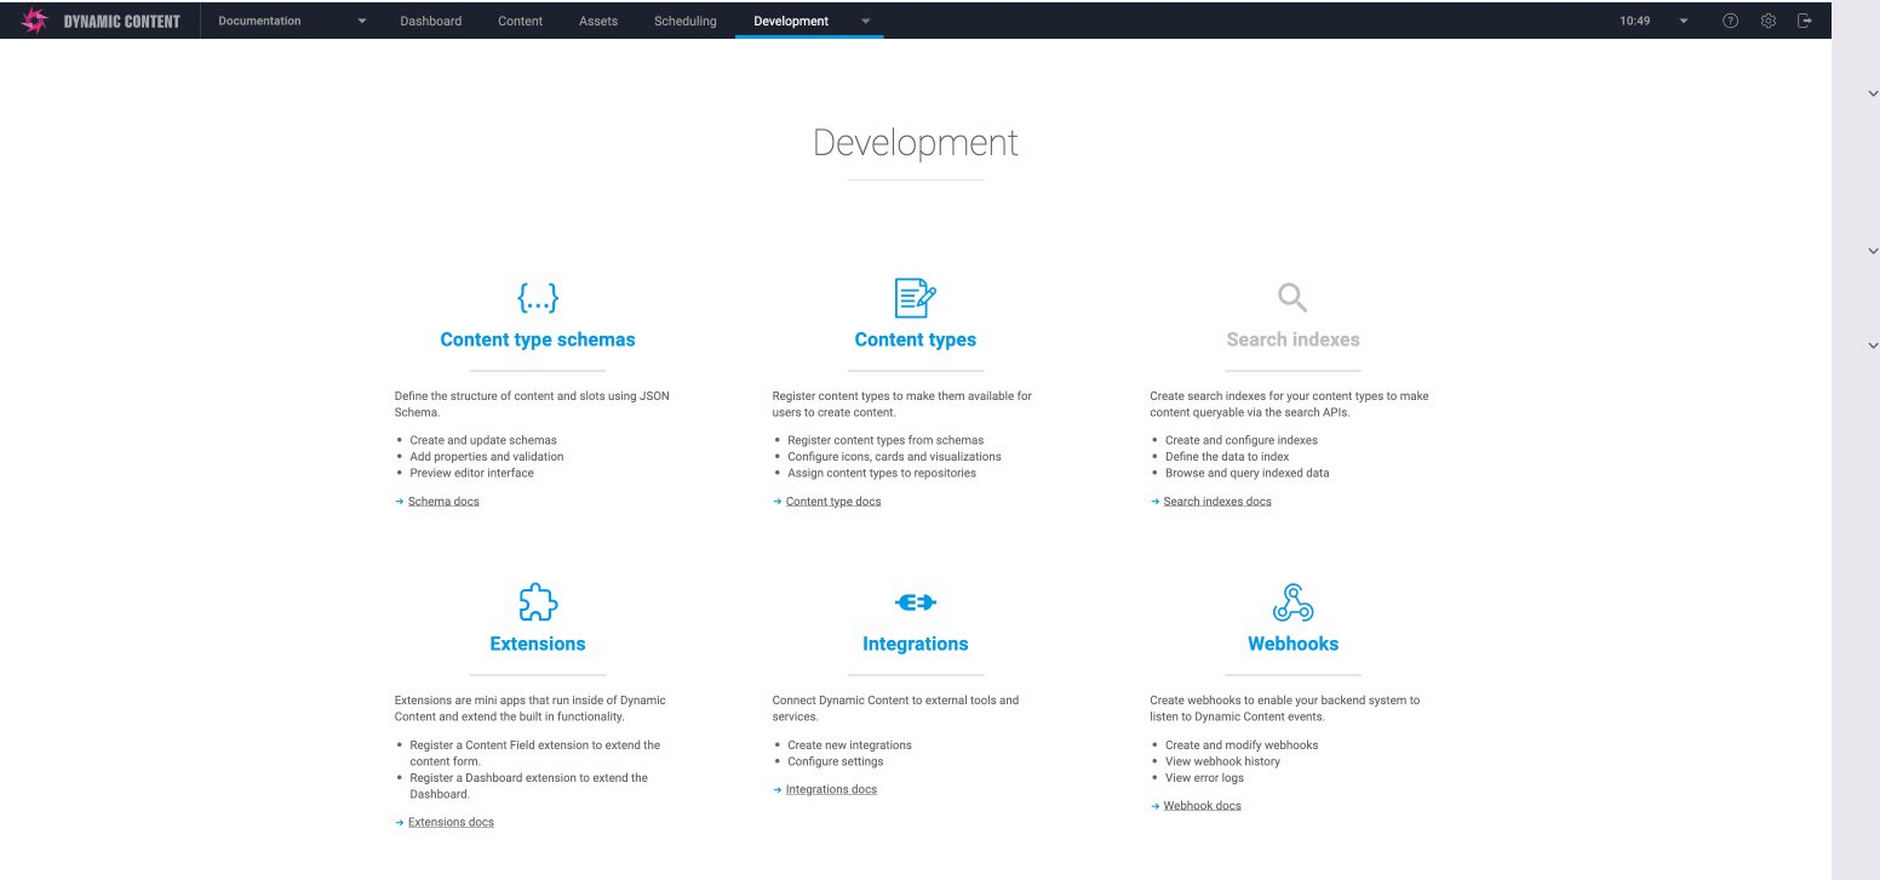 The extensions section is available on the developer home page